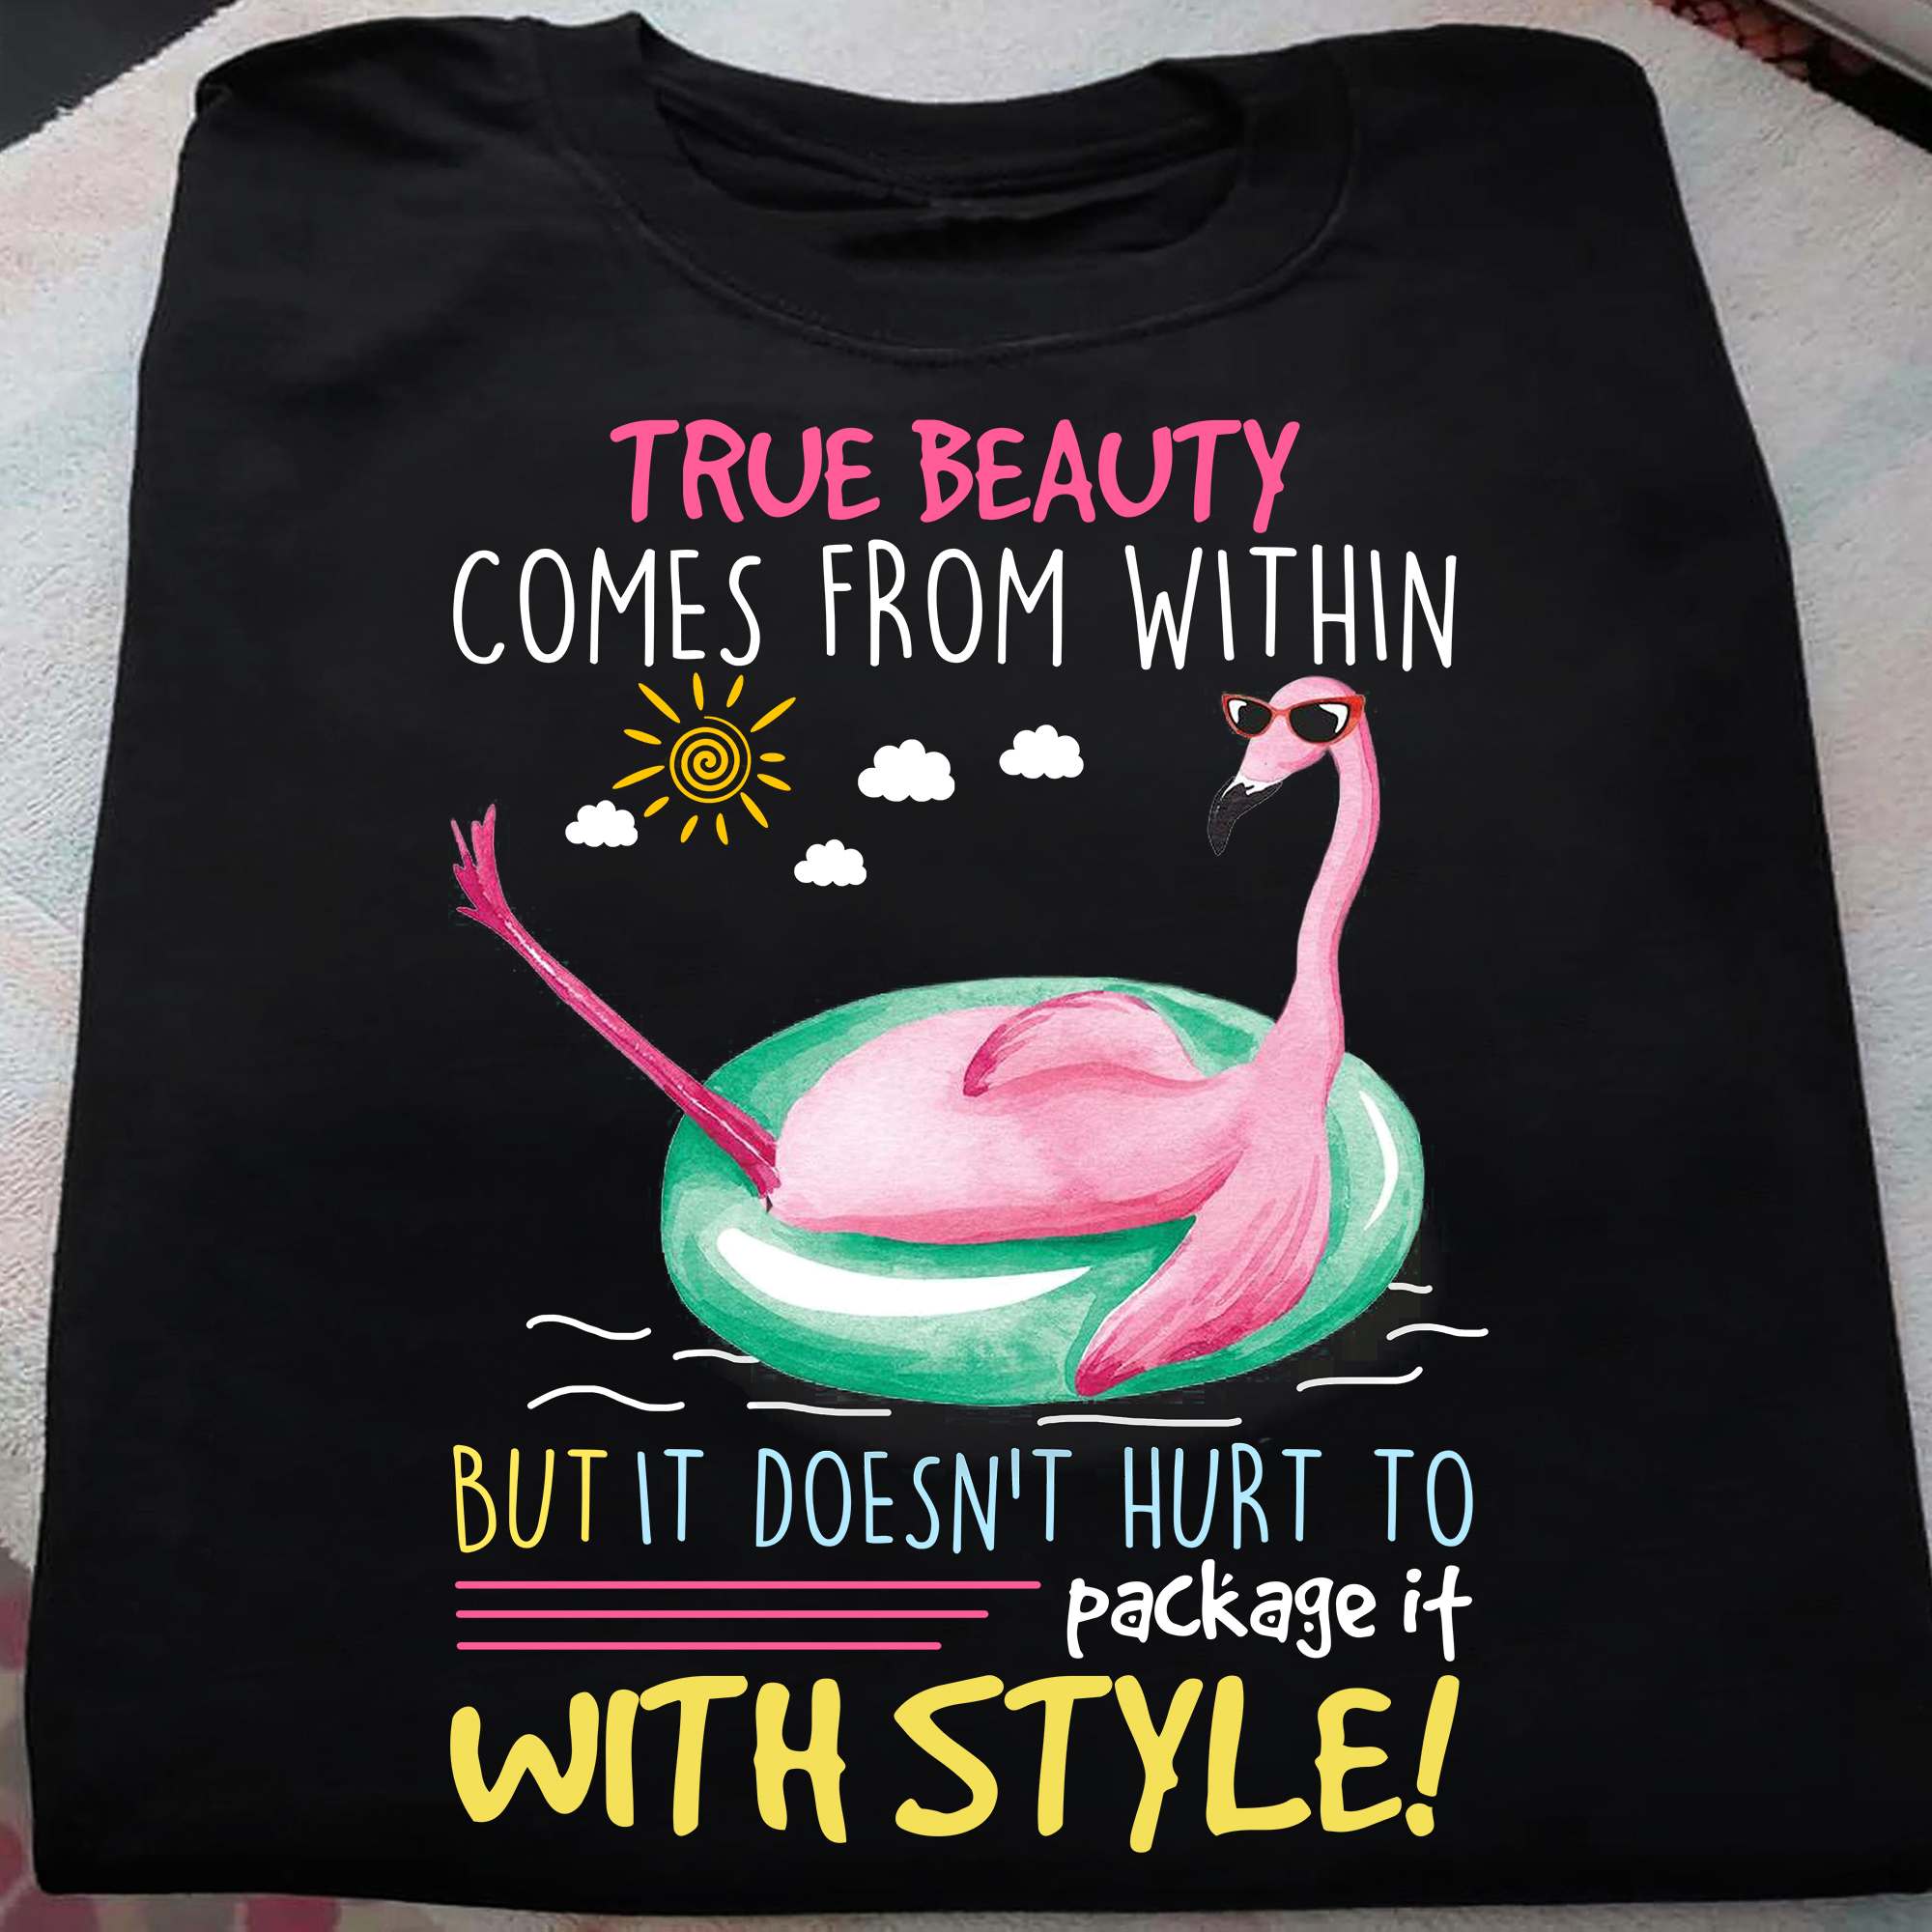 True beauty comes from within but it doesn't hurt to package it with style - Flamingo with sunglasses